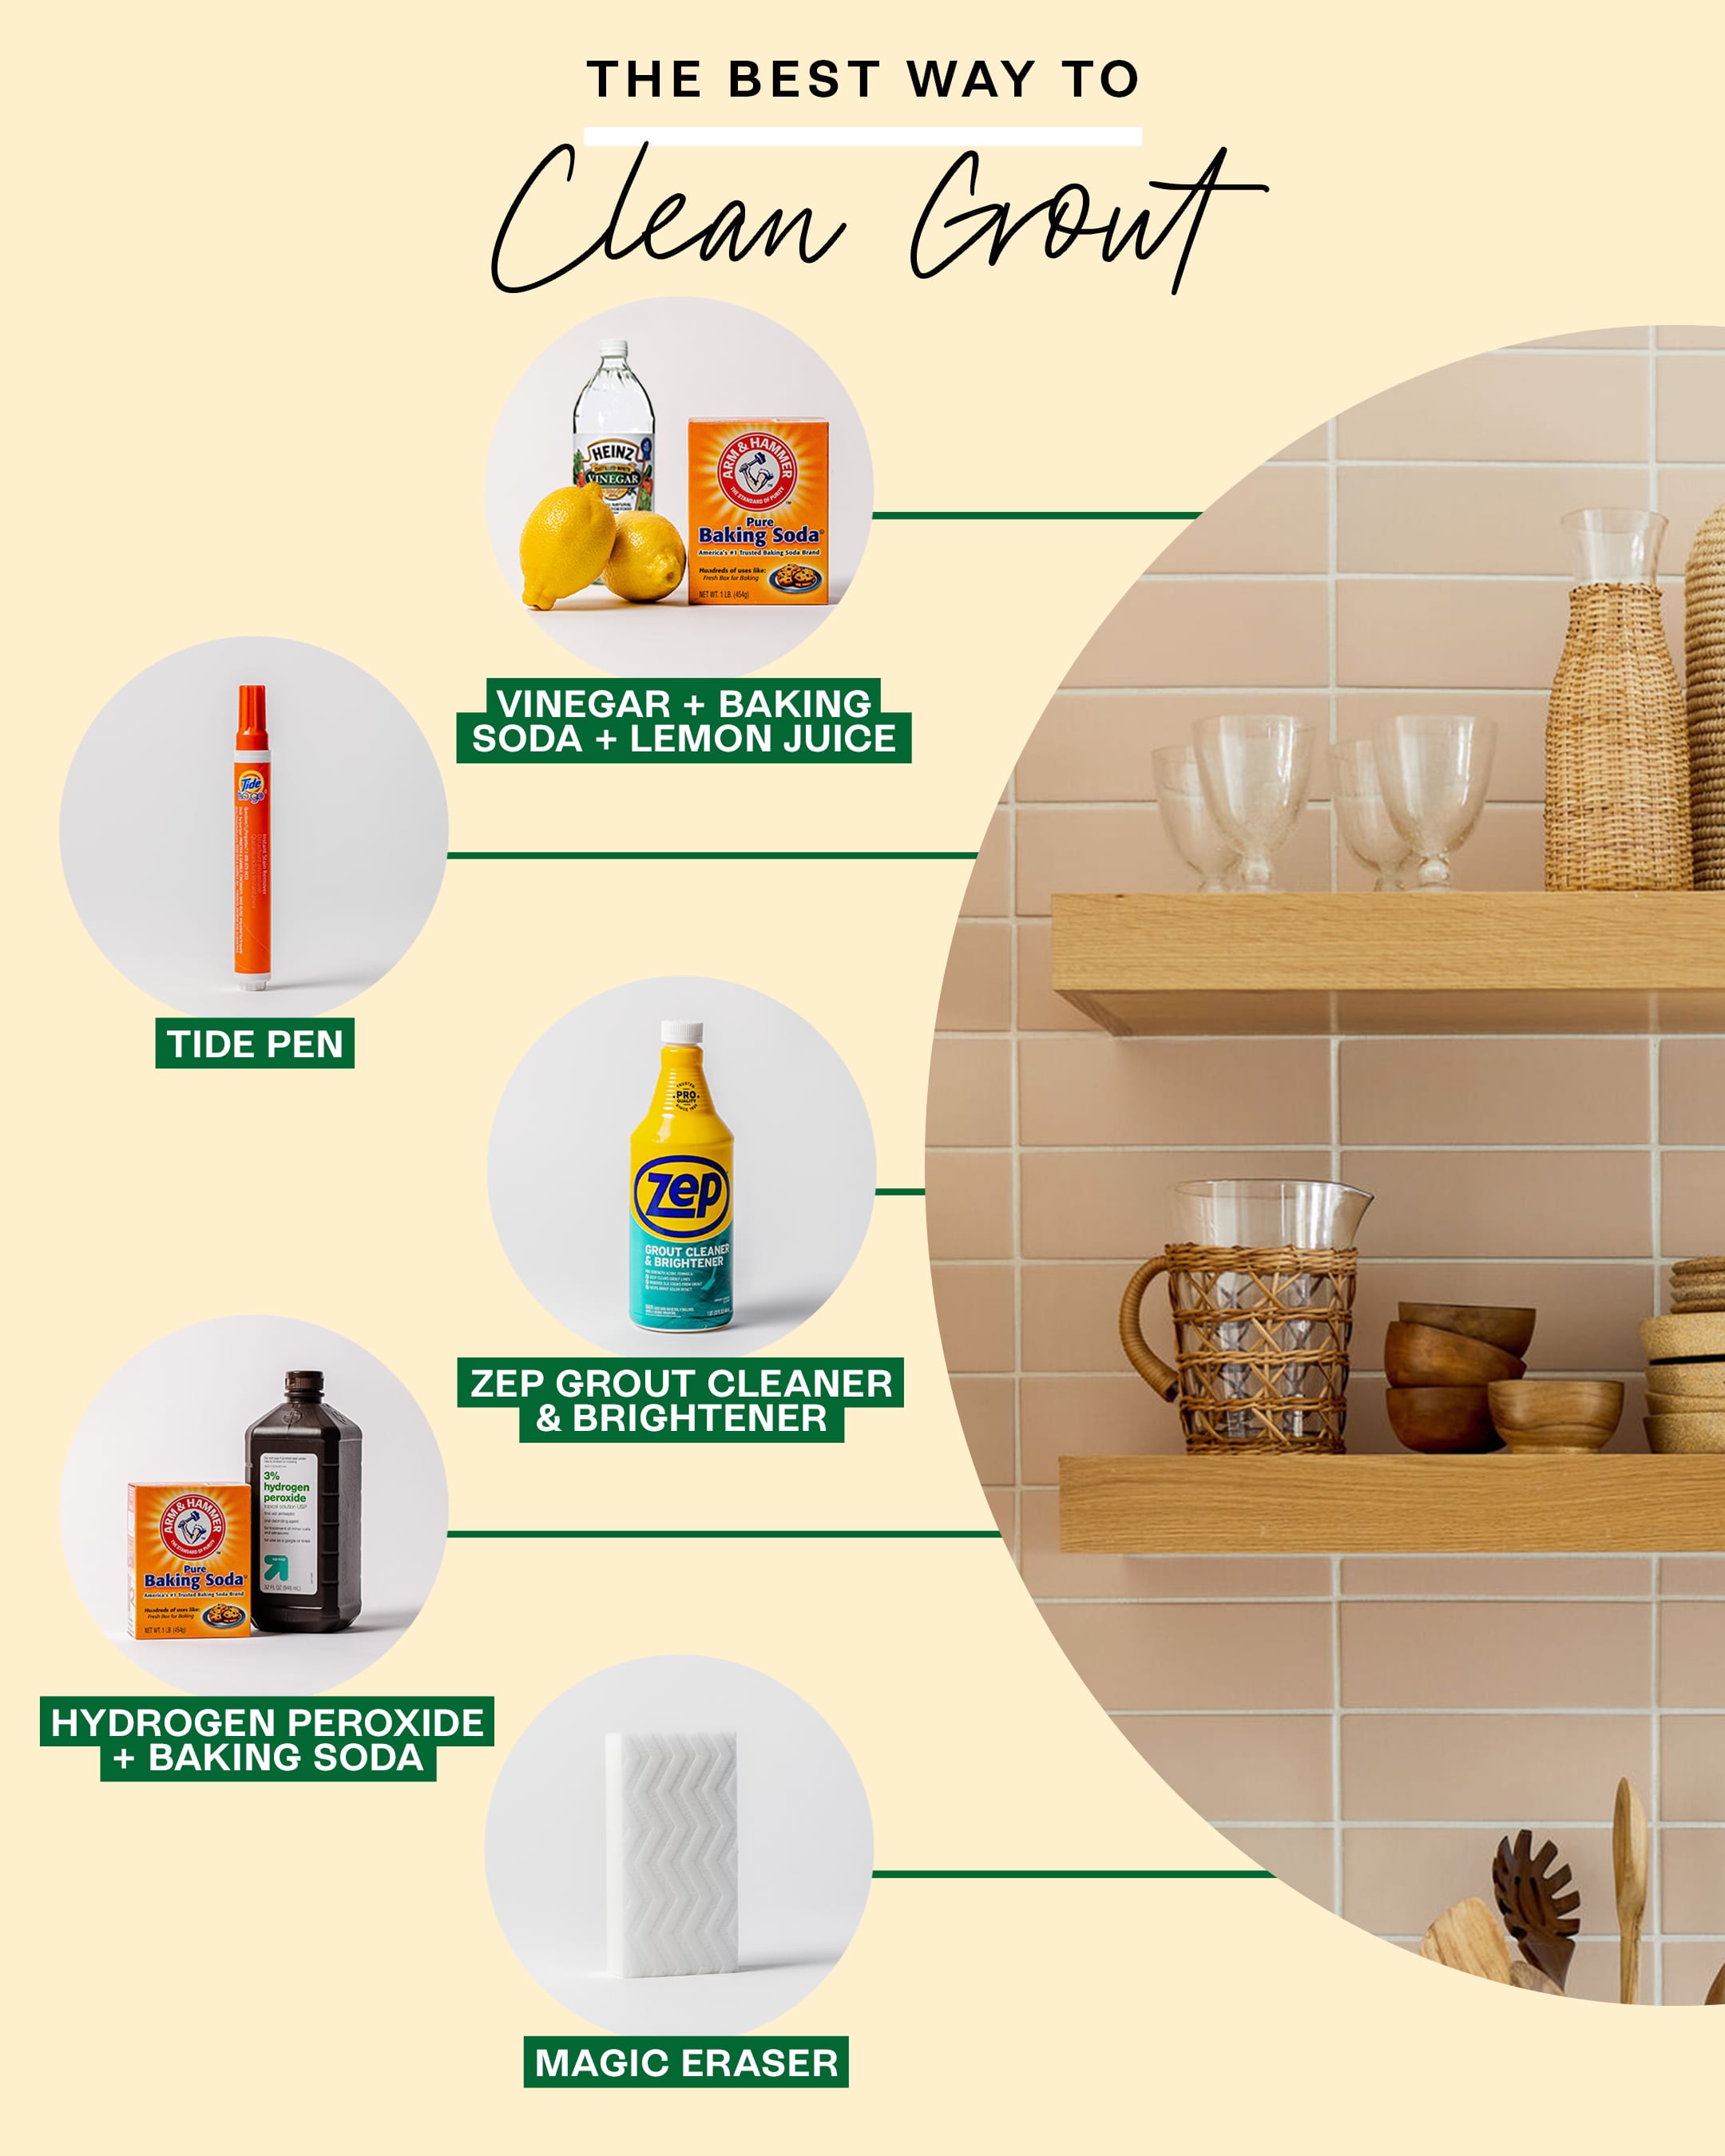 How To Clean Grout With A Homemade Grout Cleaner – Practically Functional